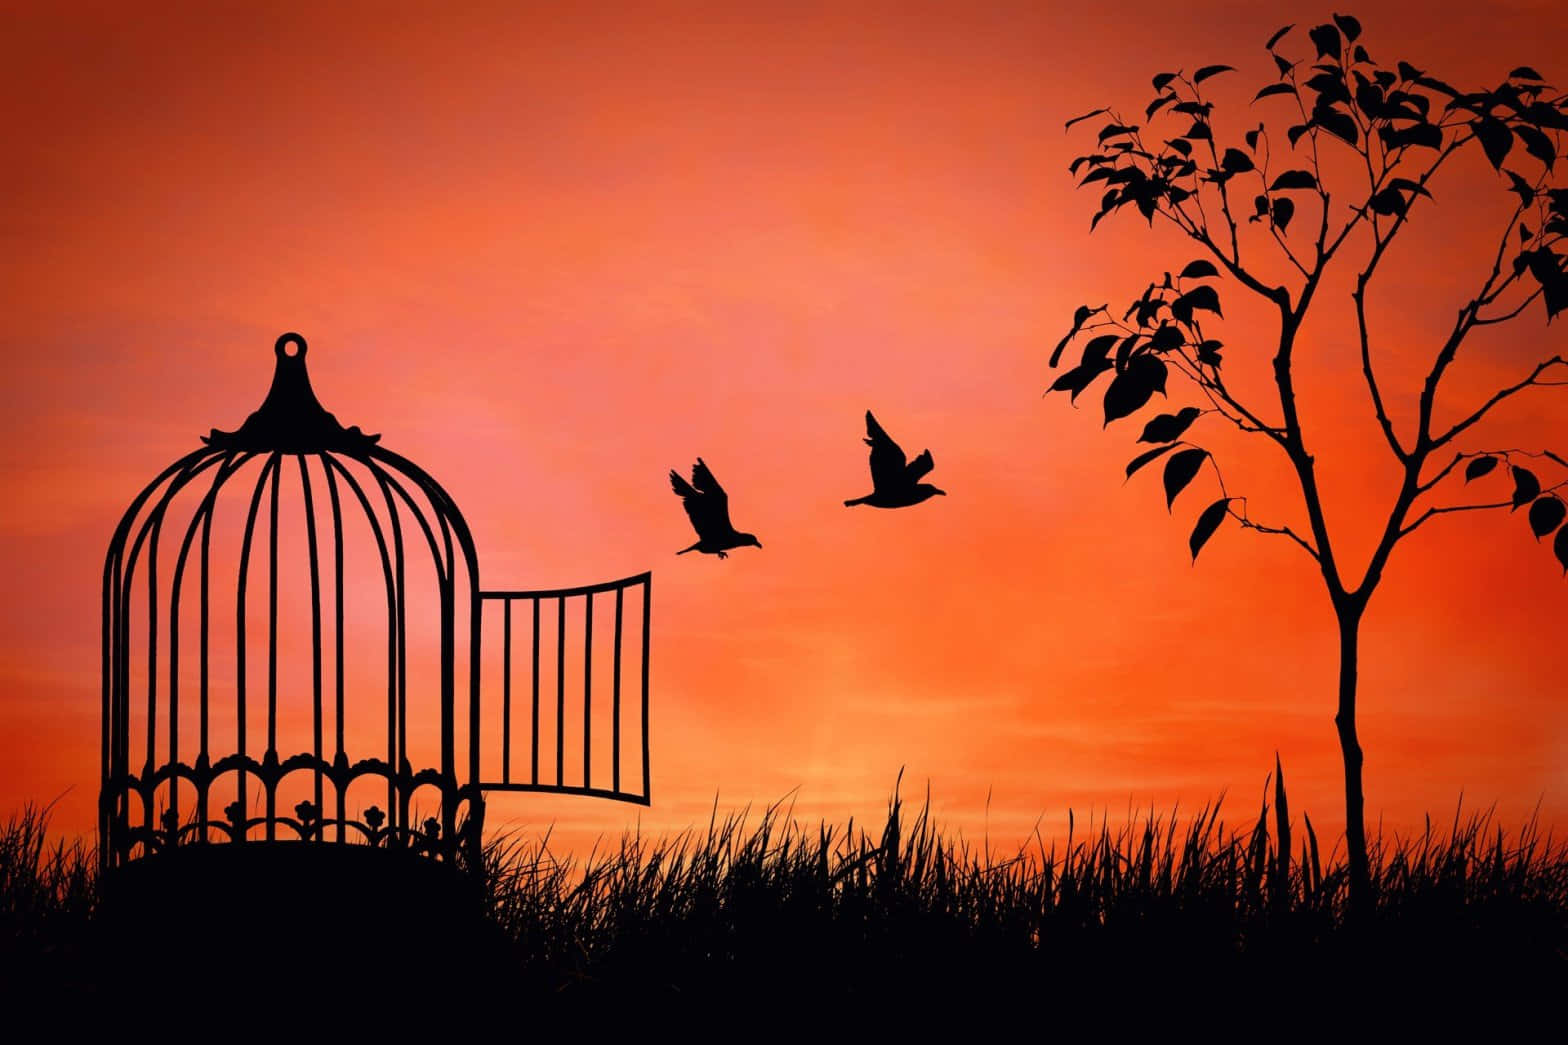 Silhouette Of A Bird Cage With Birds Flying Over It